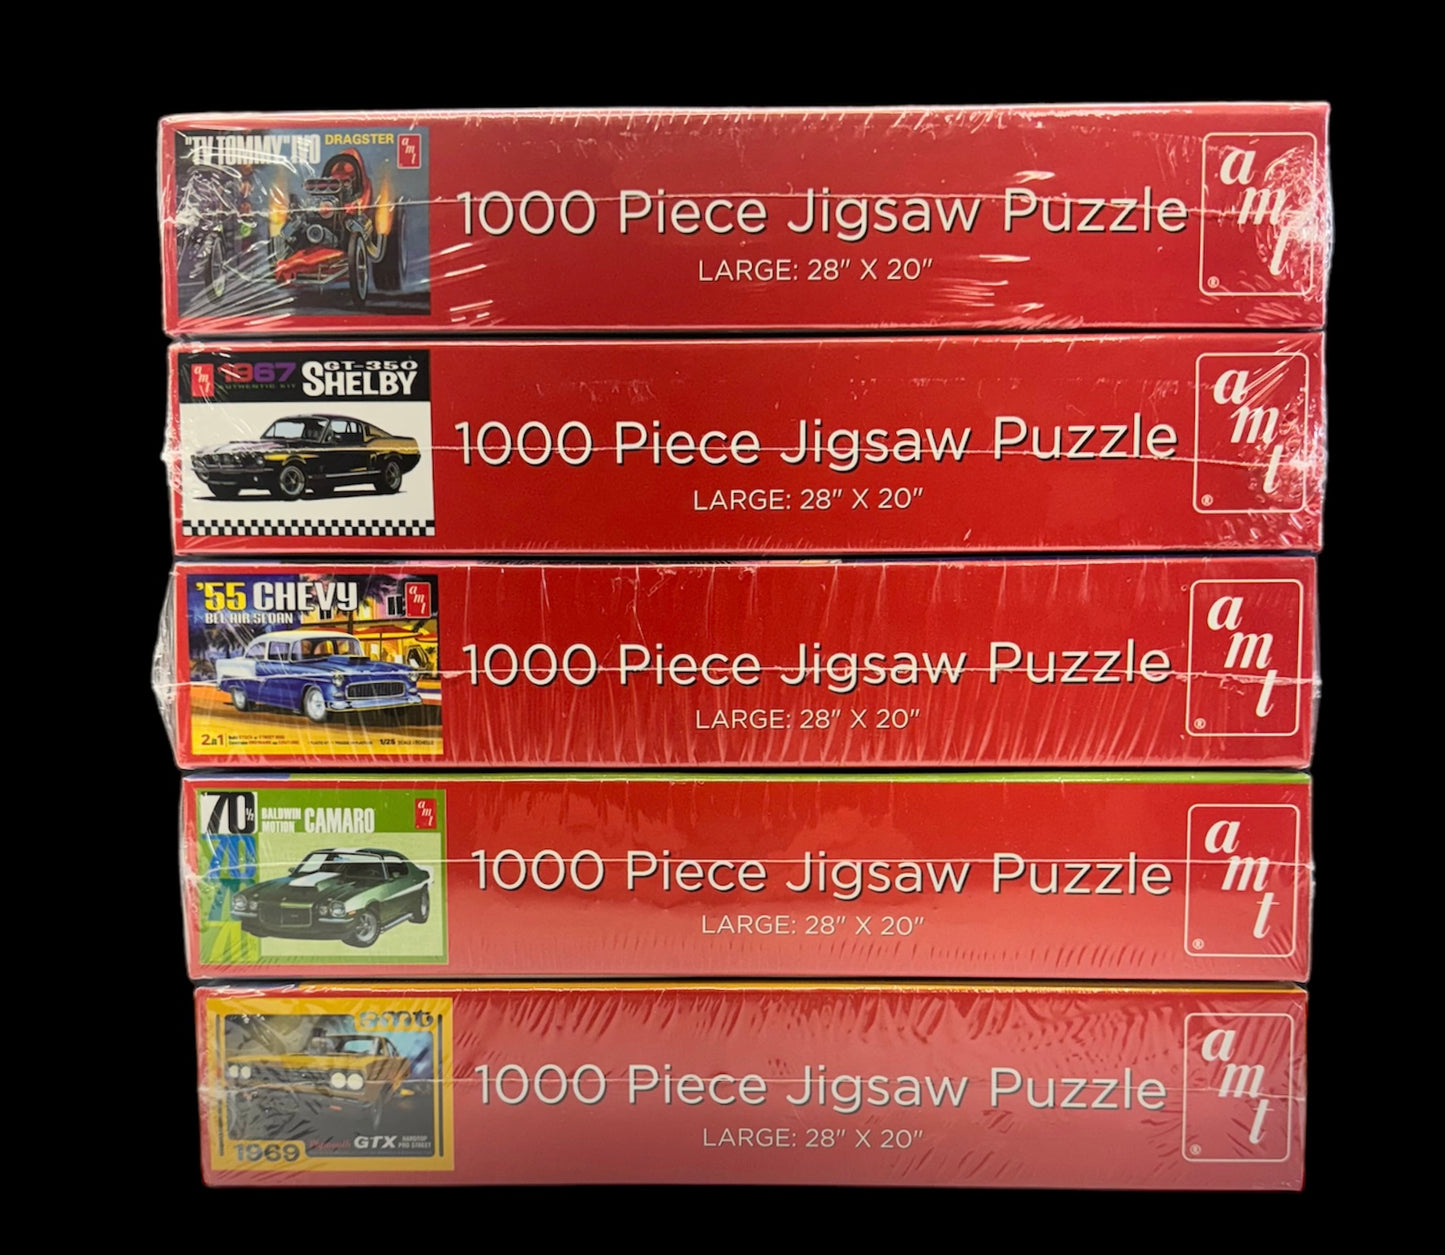 AMT "TV TOMMY IVO" Dragster 1000 Piece Jigsaw Puzzle AWAC009/12 Factory Sealed